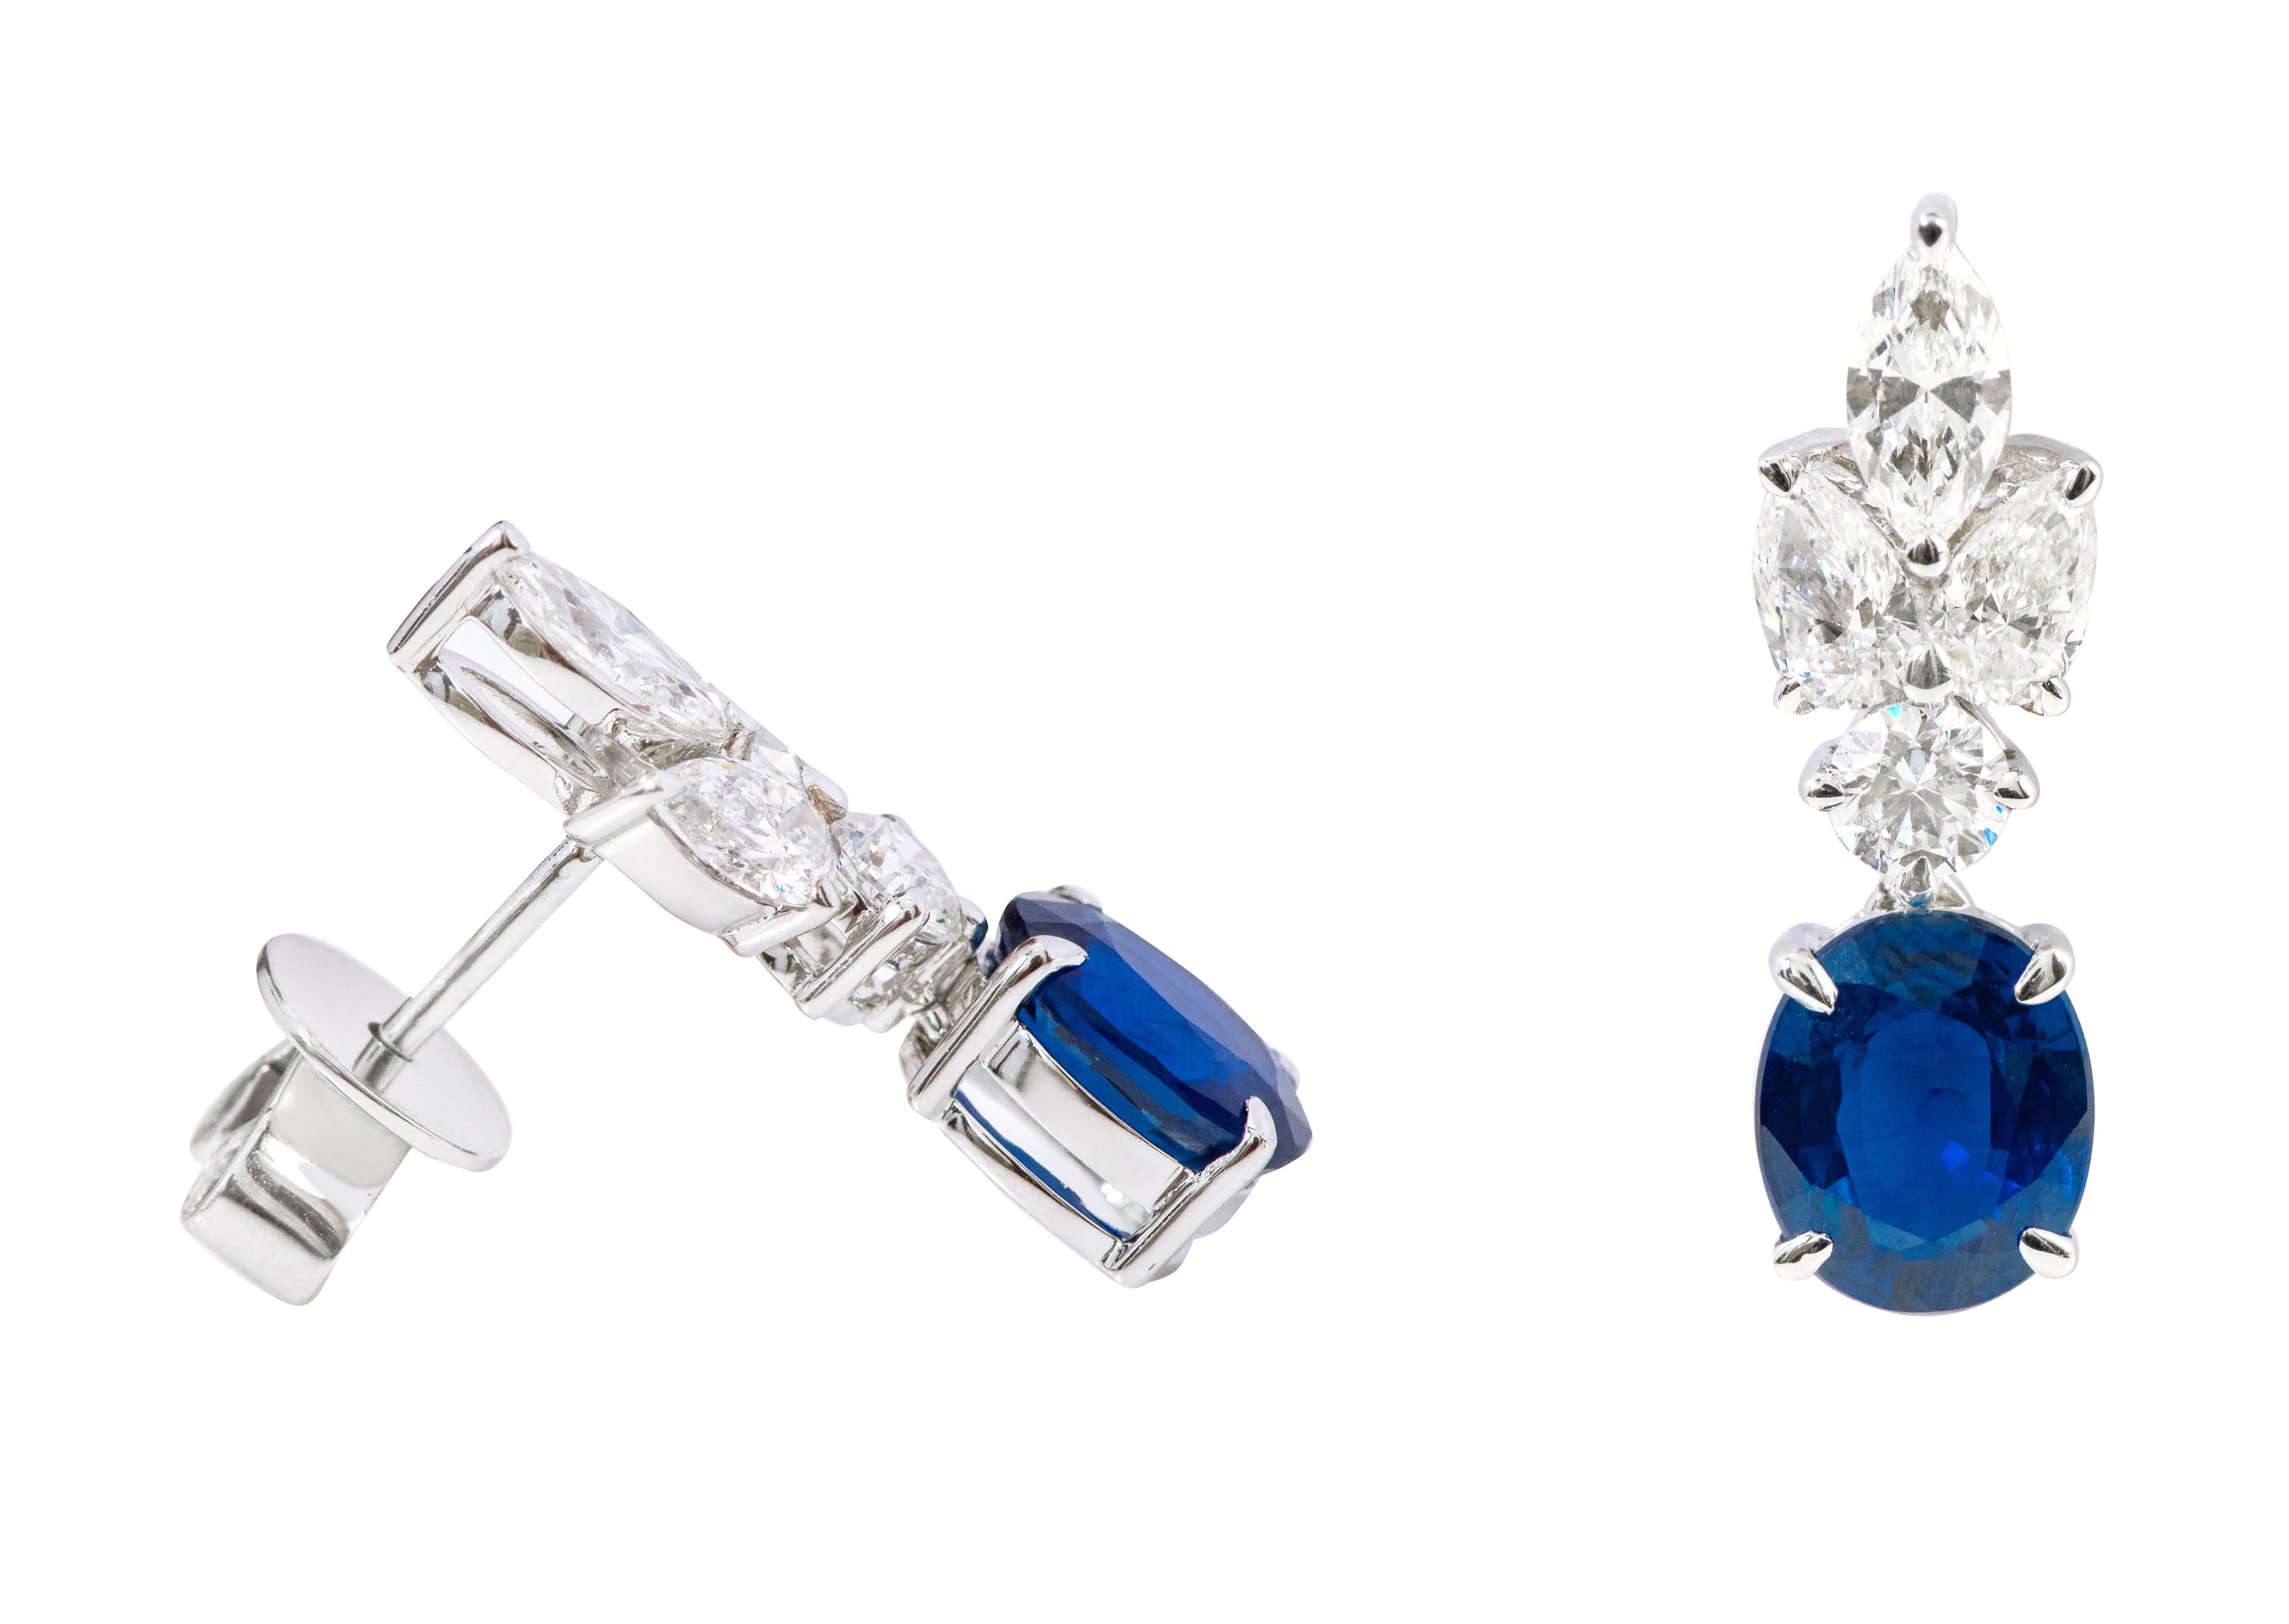 18 Karat White Gold 4.05 Carat Sapphire and Diamond Drop Earrings

This mesmerizing royal blue sapphire and diamond earring is elegant. The solitaire oval sapphire is the ideal drop that hangs beautifully from the boat-shaped design formed on top.